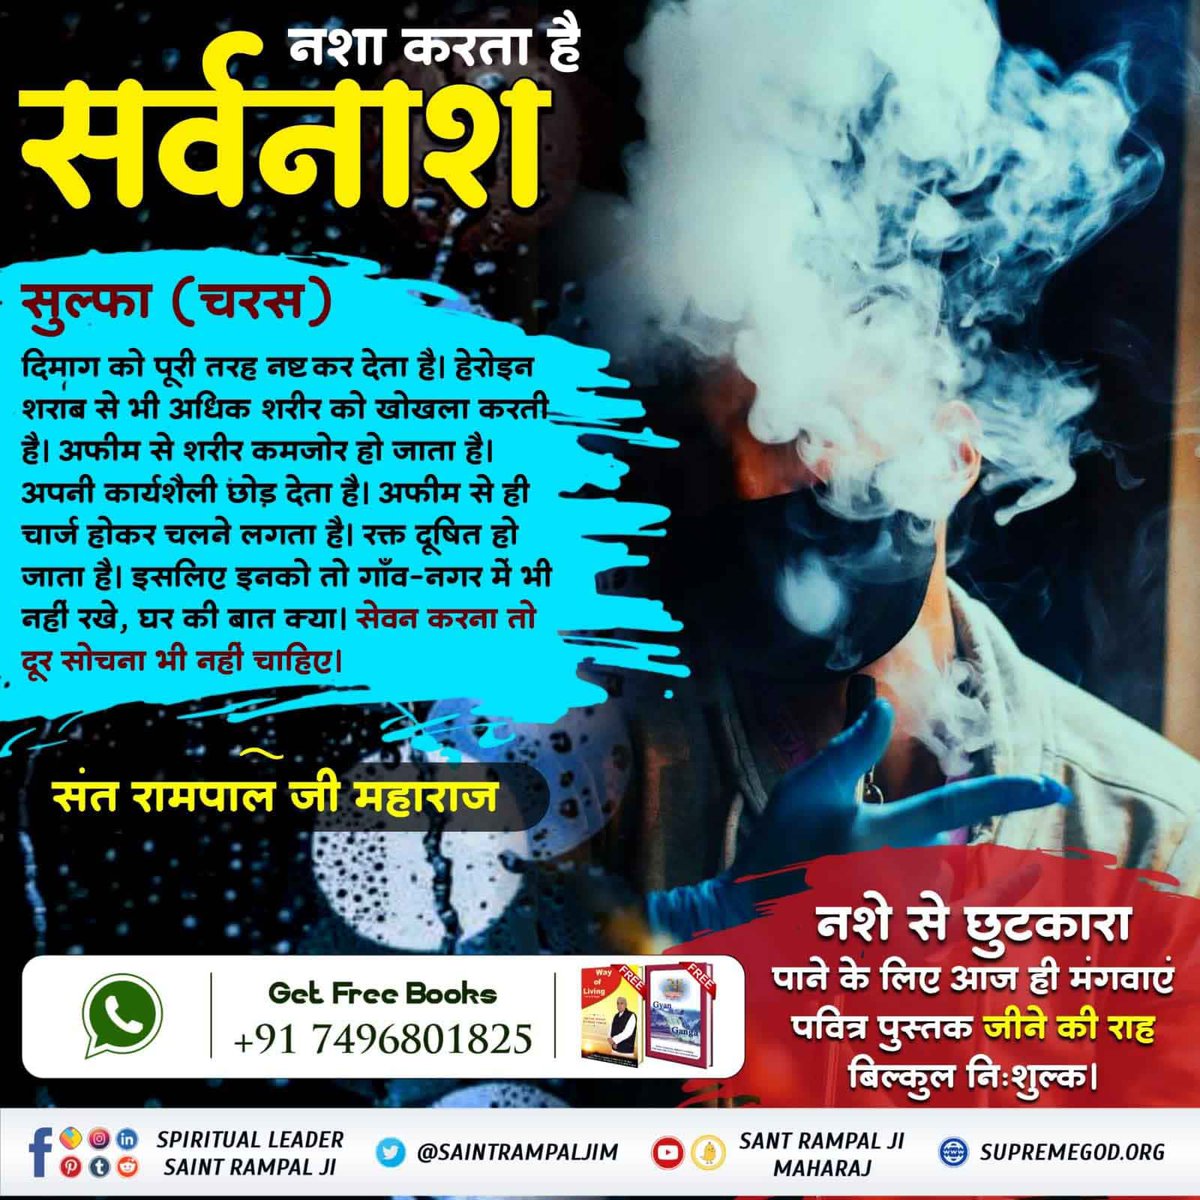 #नशा_एकअभिशापहै_कैसे_मुक्तिहो
Addiction causes destruction
Drinking alcohol causes terrible diseases like cancer. It always makes a person unhappy. New diseases occur due to addiction. It is better to give it up soon.
Must Watch Sadhna TV-7:30 PM 

Sant Rampal Ji Maharaj